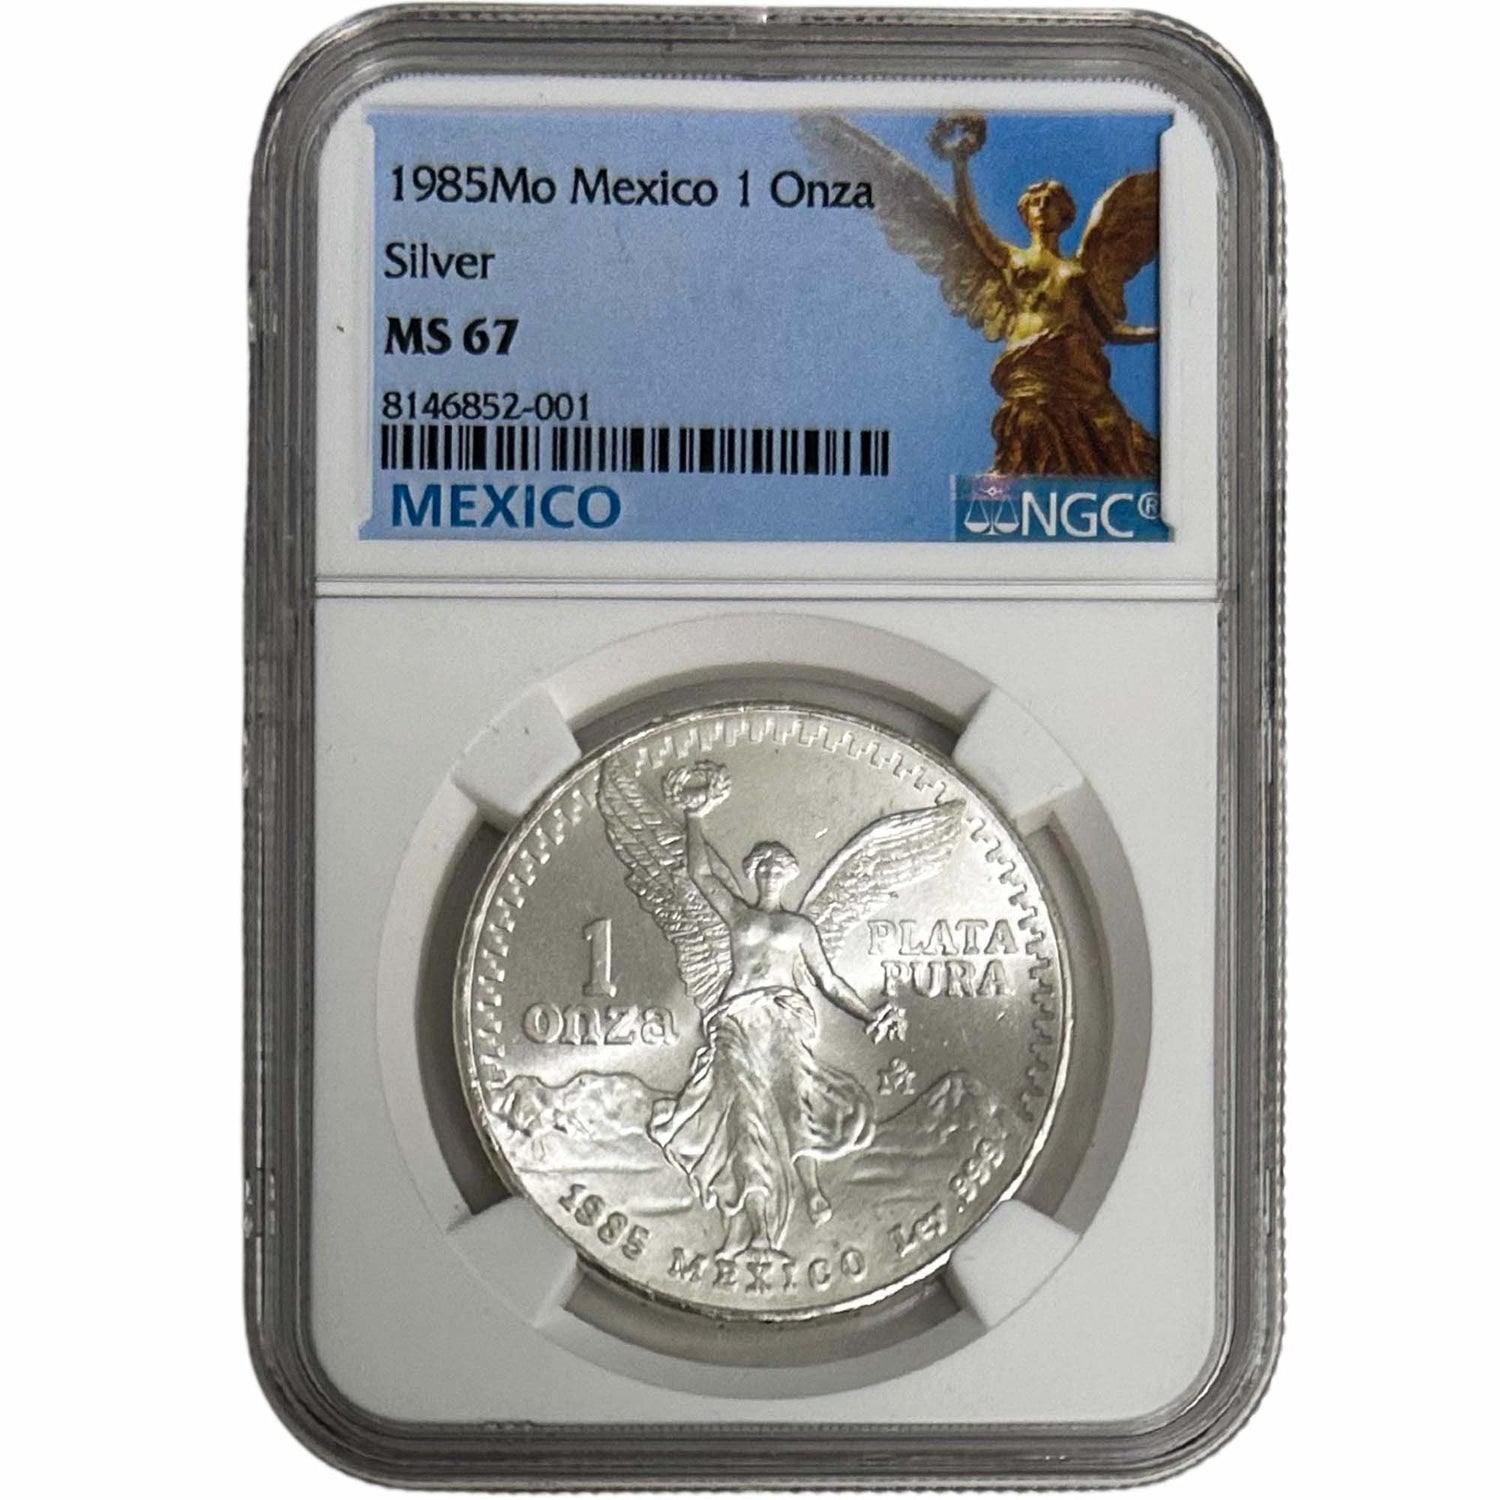 1985Mo Mexico 1 Silver Onza MS 67 Graded NGC Front